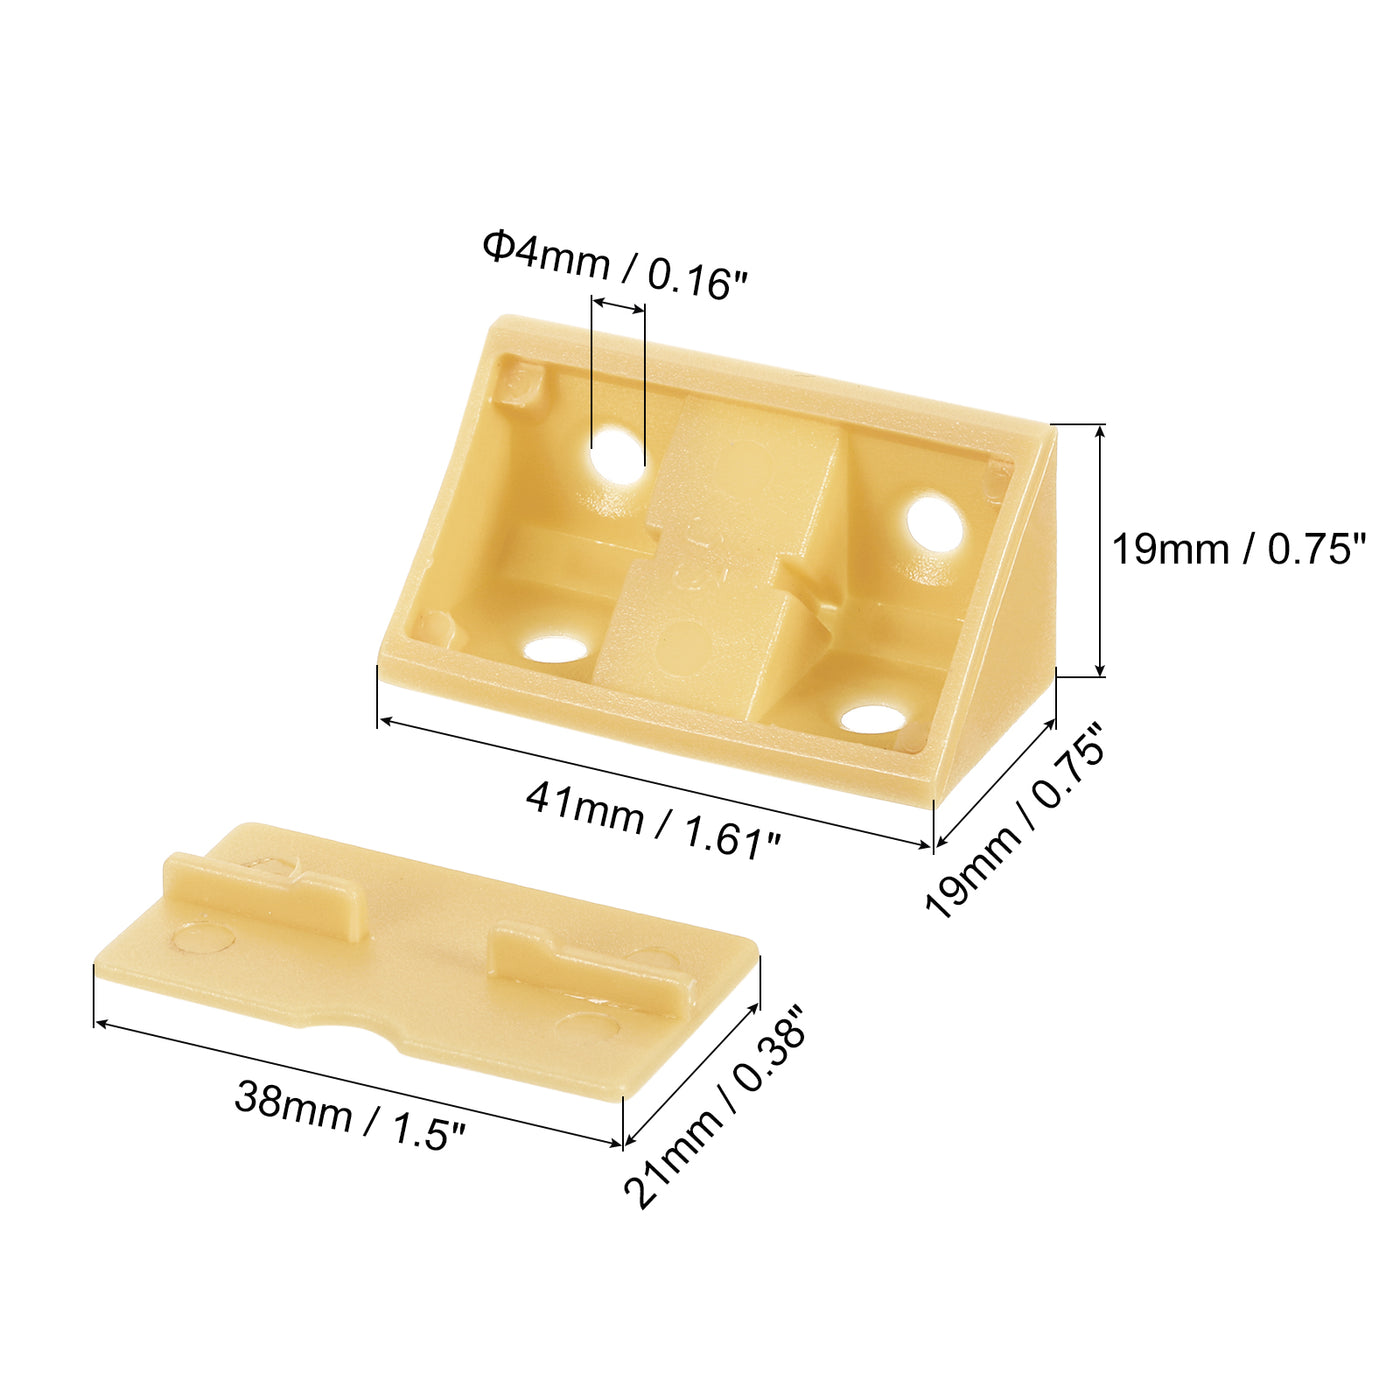 uxcell Uxcell 10Pcs 90 Degree Plastic Corner Braces with Cover Cap, 41x19x19mm Nylon Shelf Right Angle Brackets with Screws for Cabinets, Cupboards (Dark Yellow)